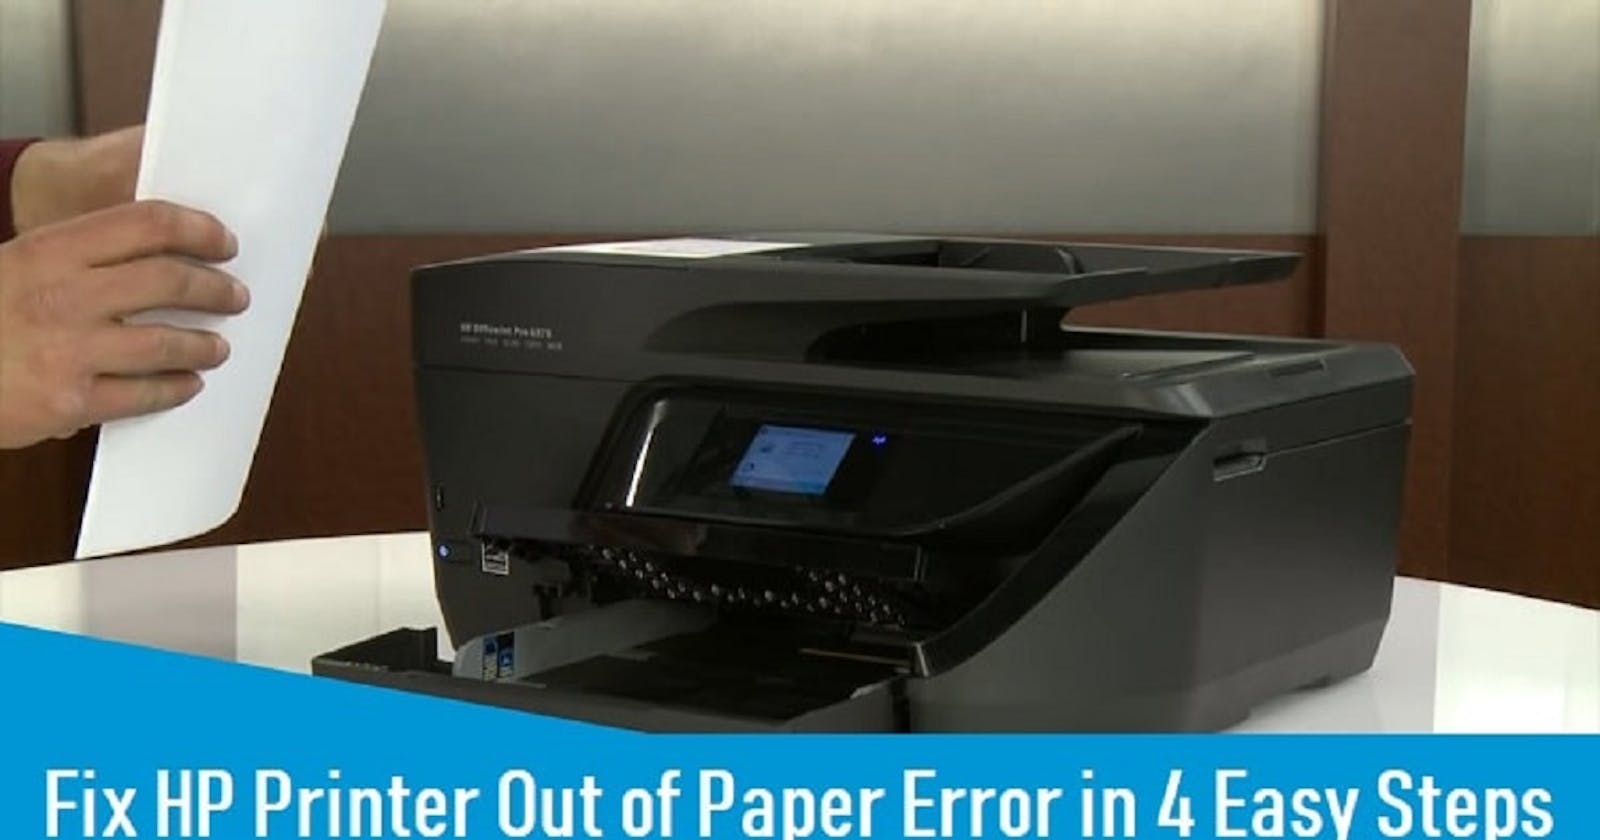 How to Settle the HP Printer Keeps Saying Out of Error?